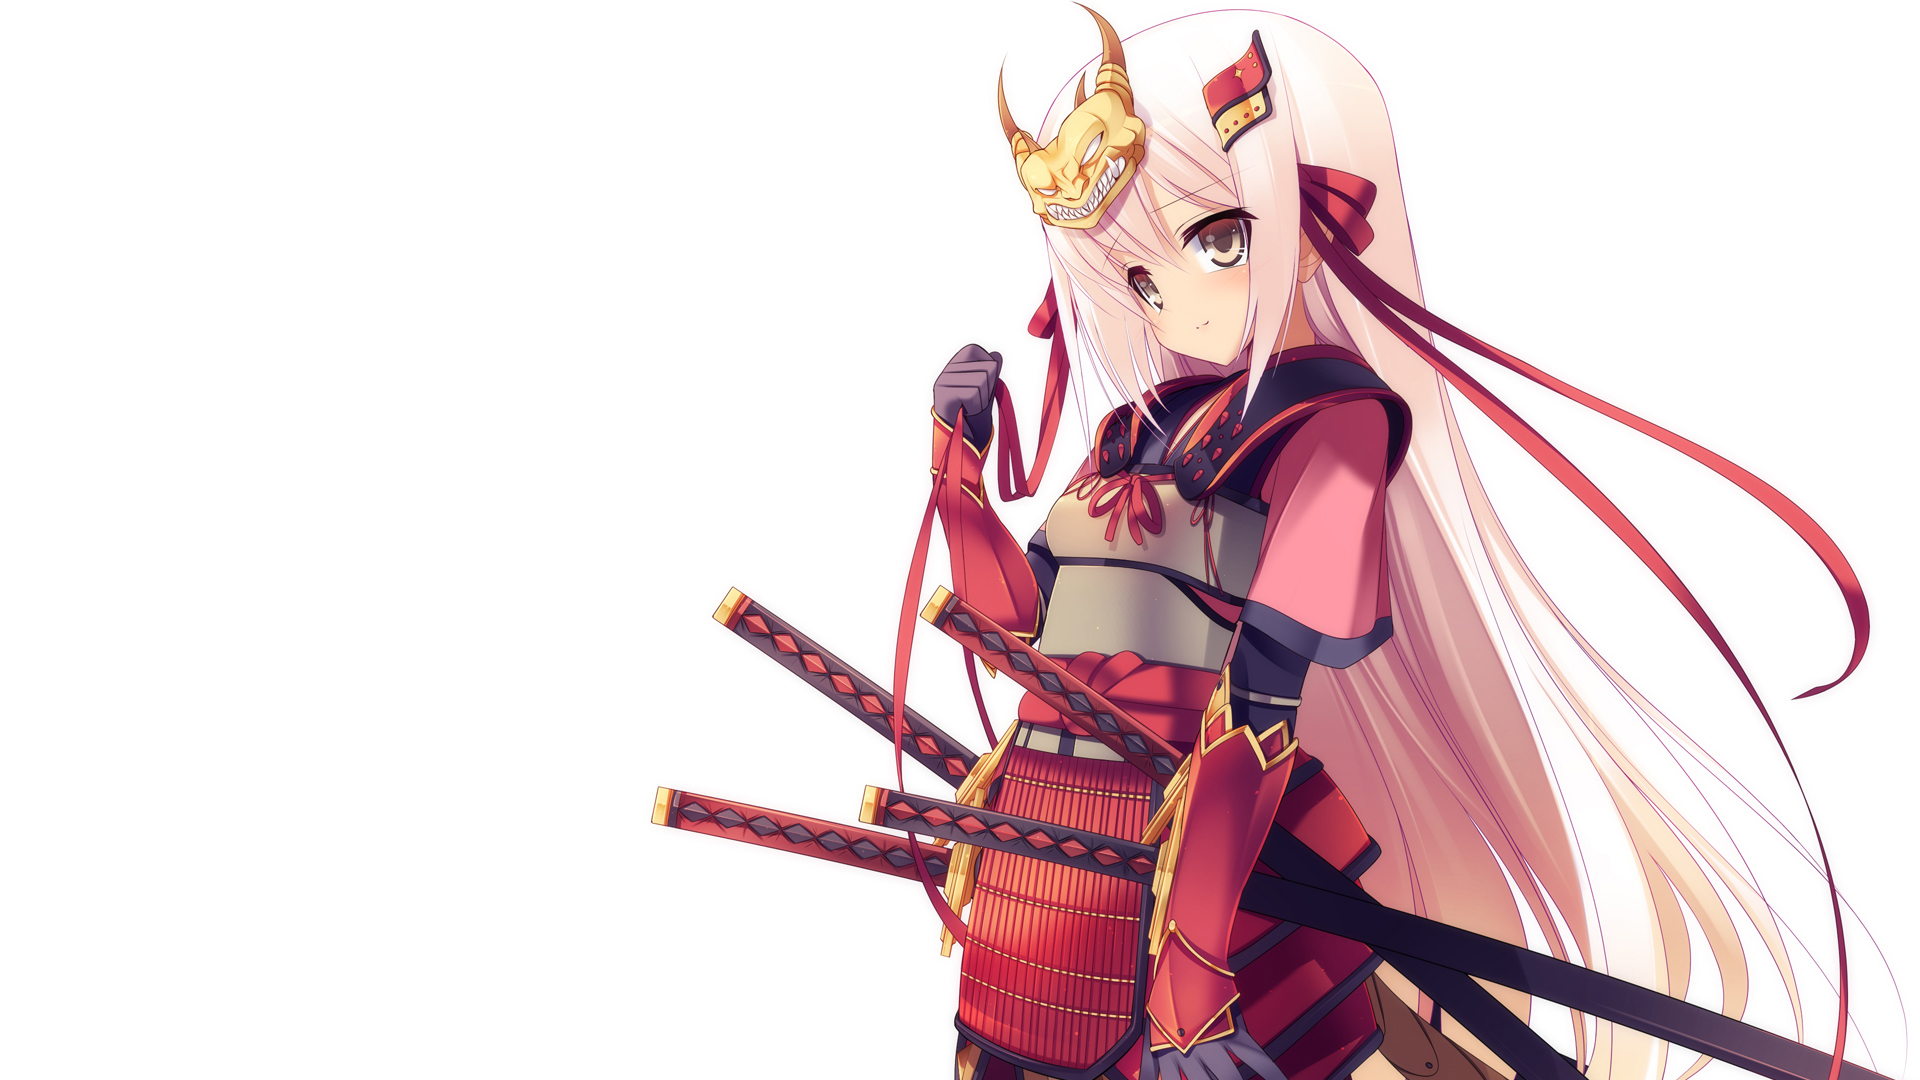 Sengoku Hime video game artwork featuring vibrant characters in a dynamic setting